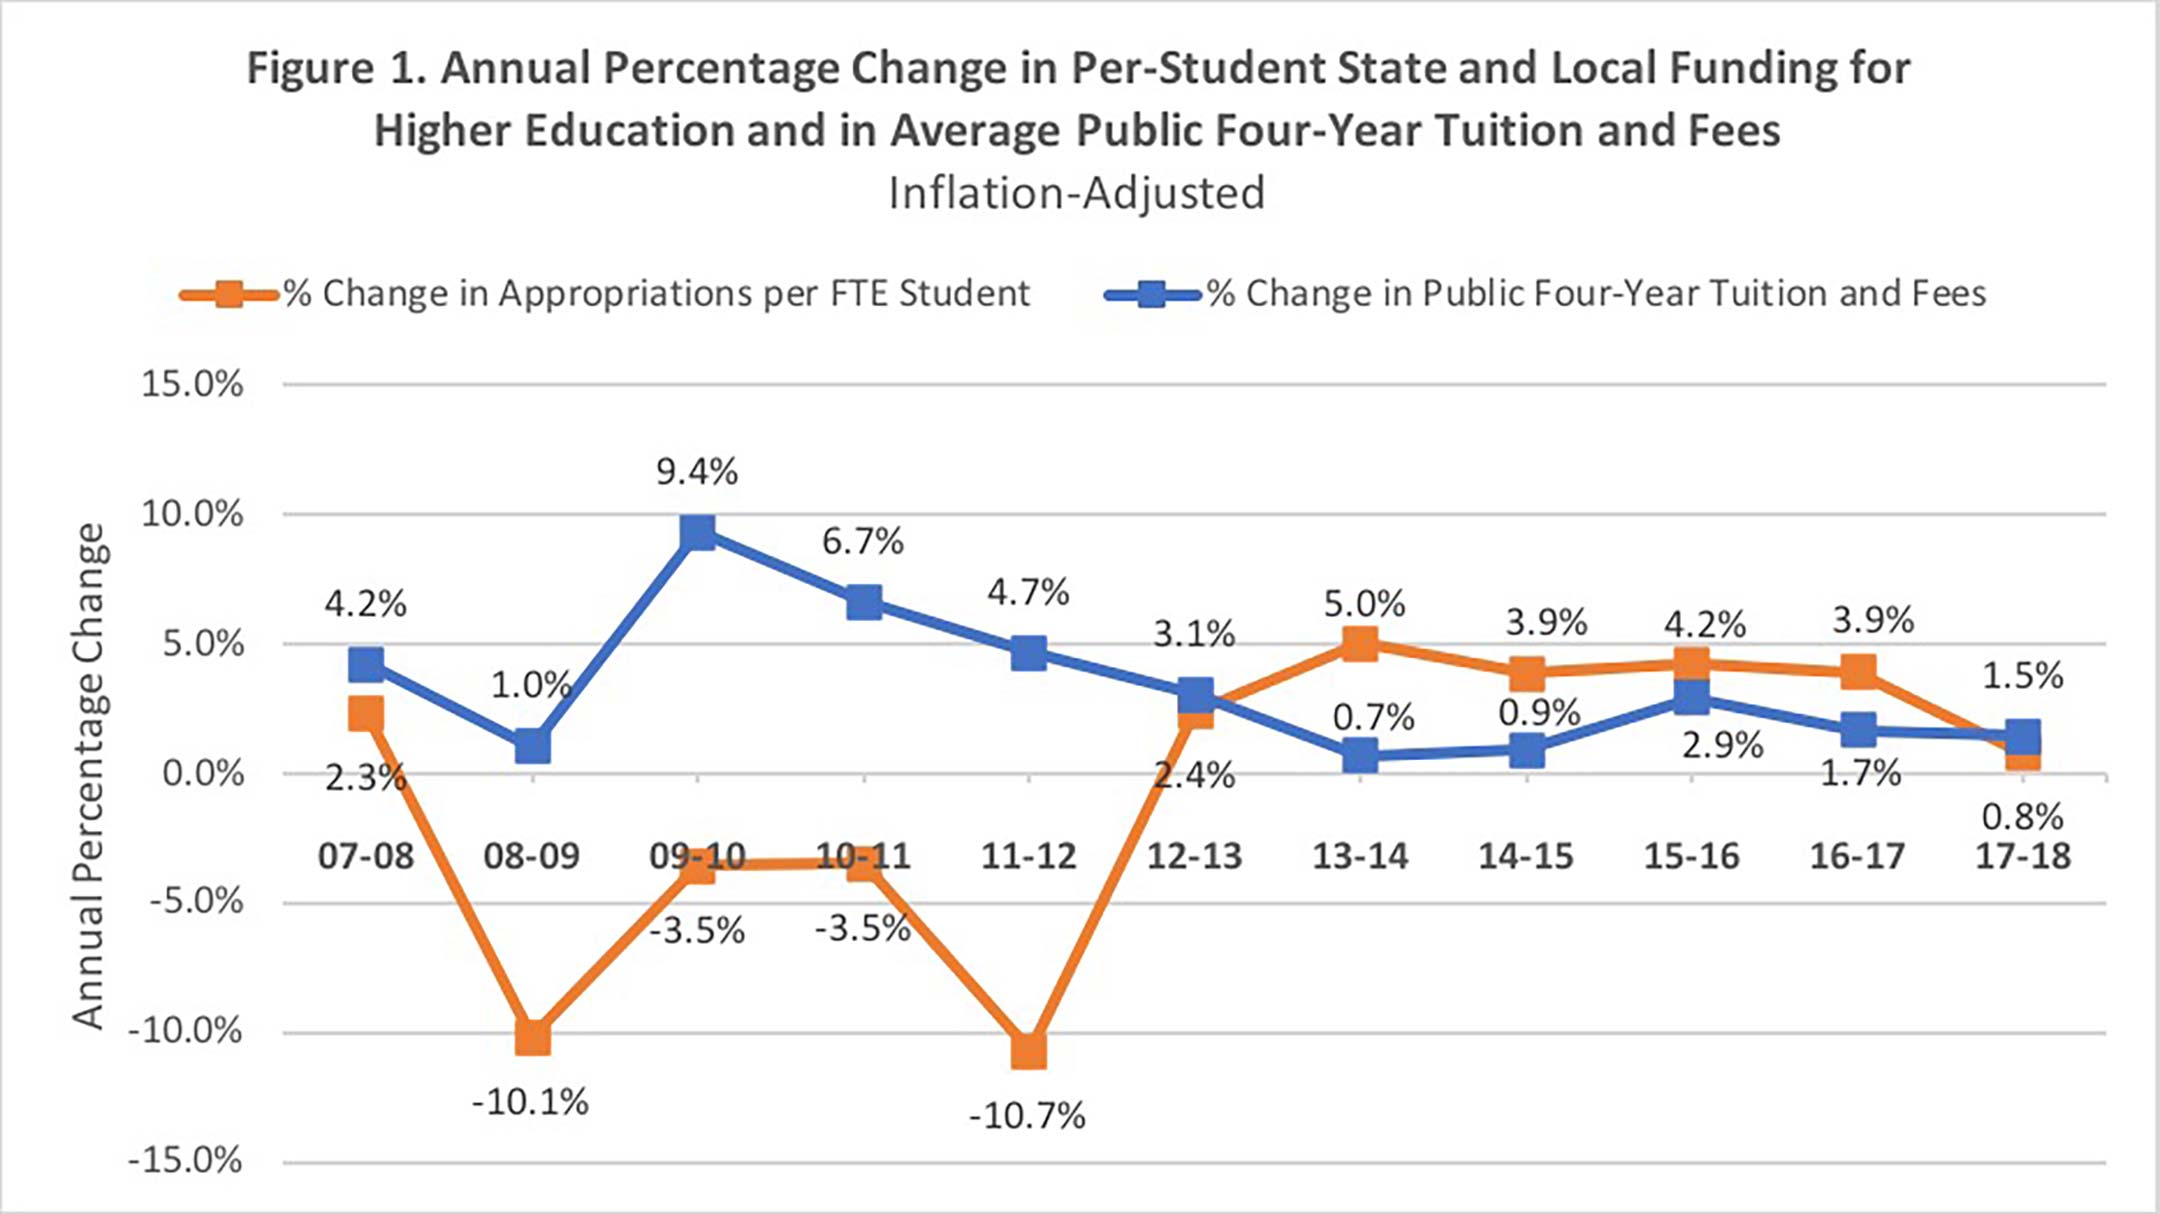 chart showing Annual Percentage Change in Per-Student State and Local Funding for Higher Education and in Average Public Four-Year Tuition and Fees